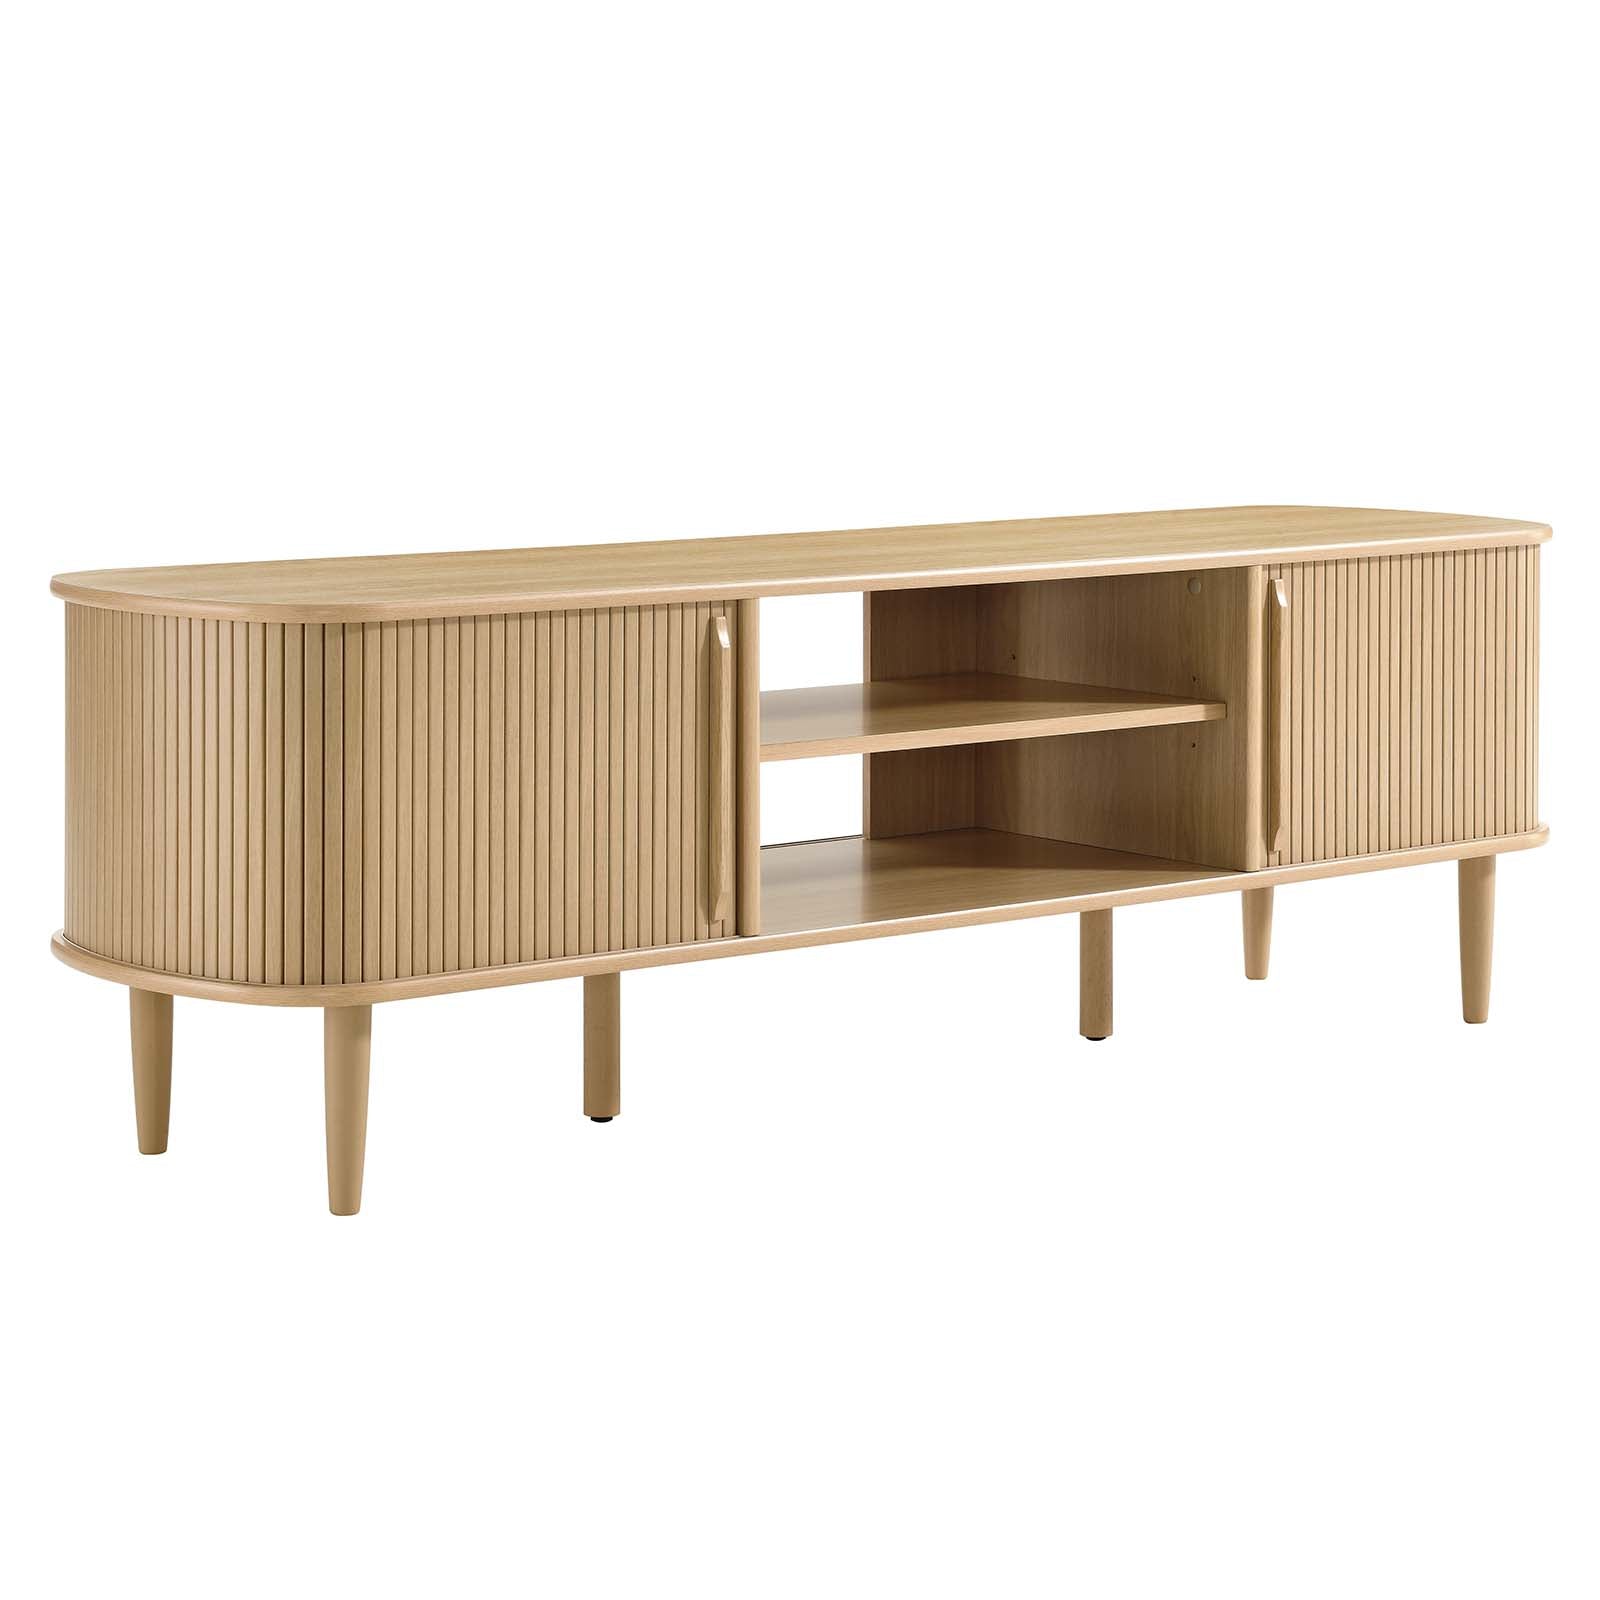 Contour 63" Wood TV Stand - East Shore Modern Home Furnishings